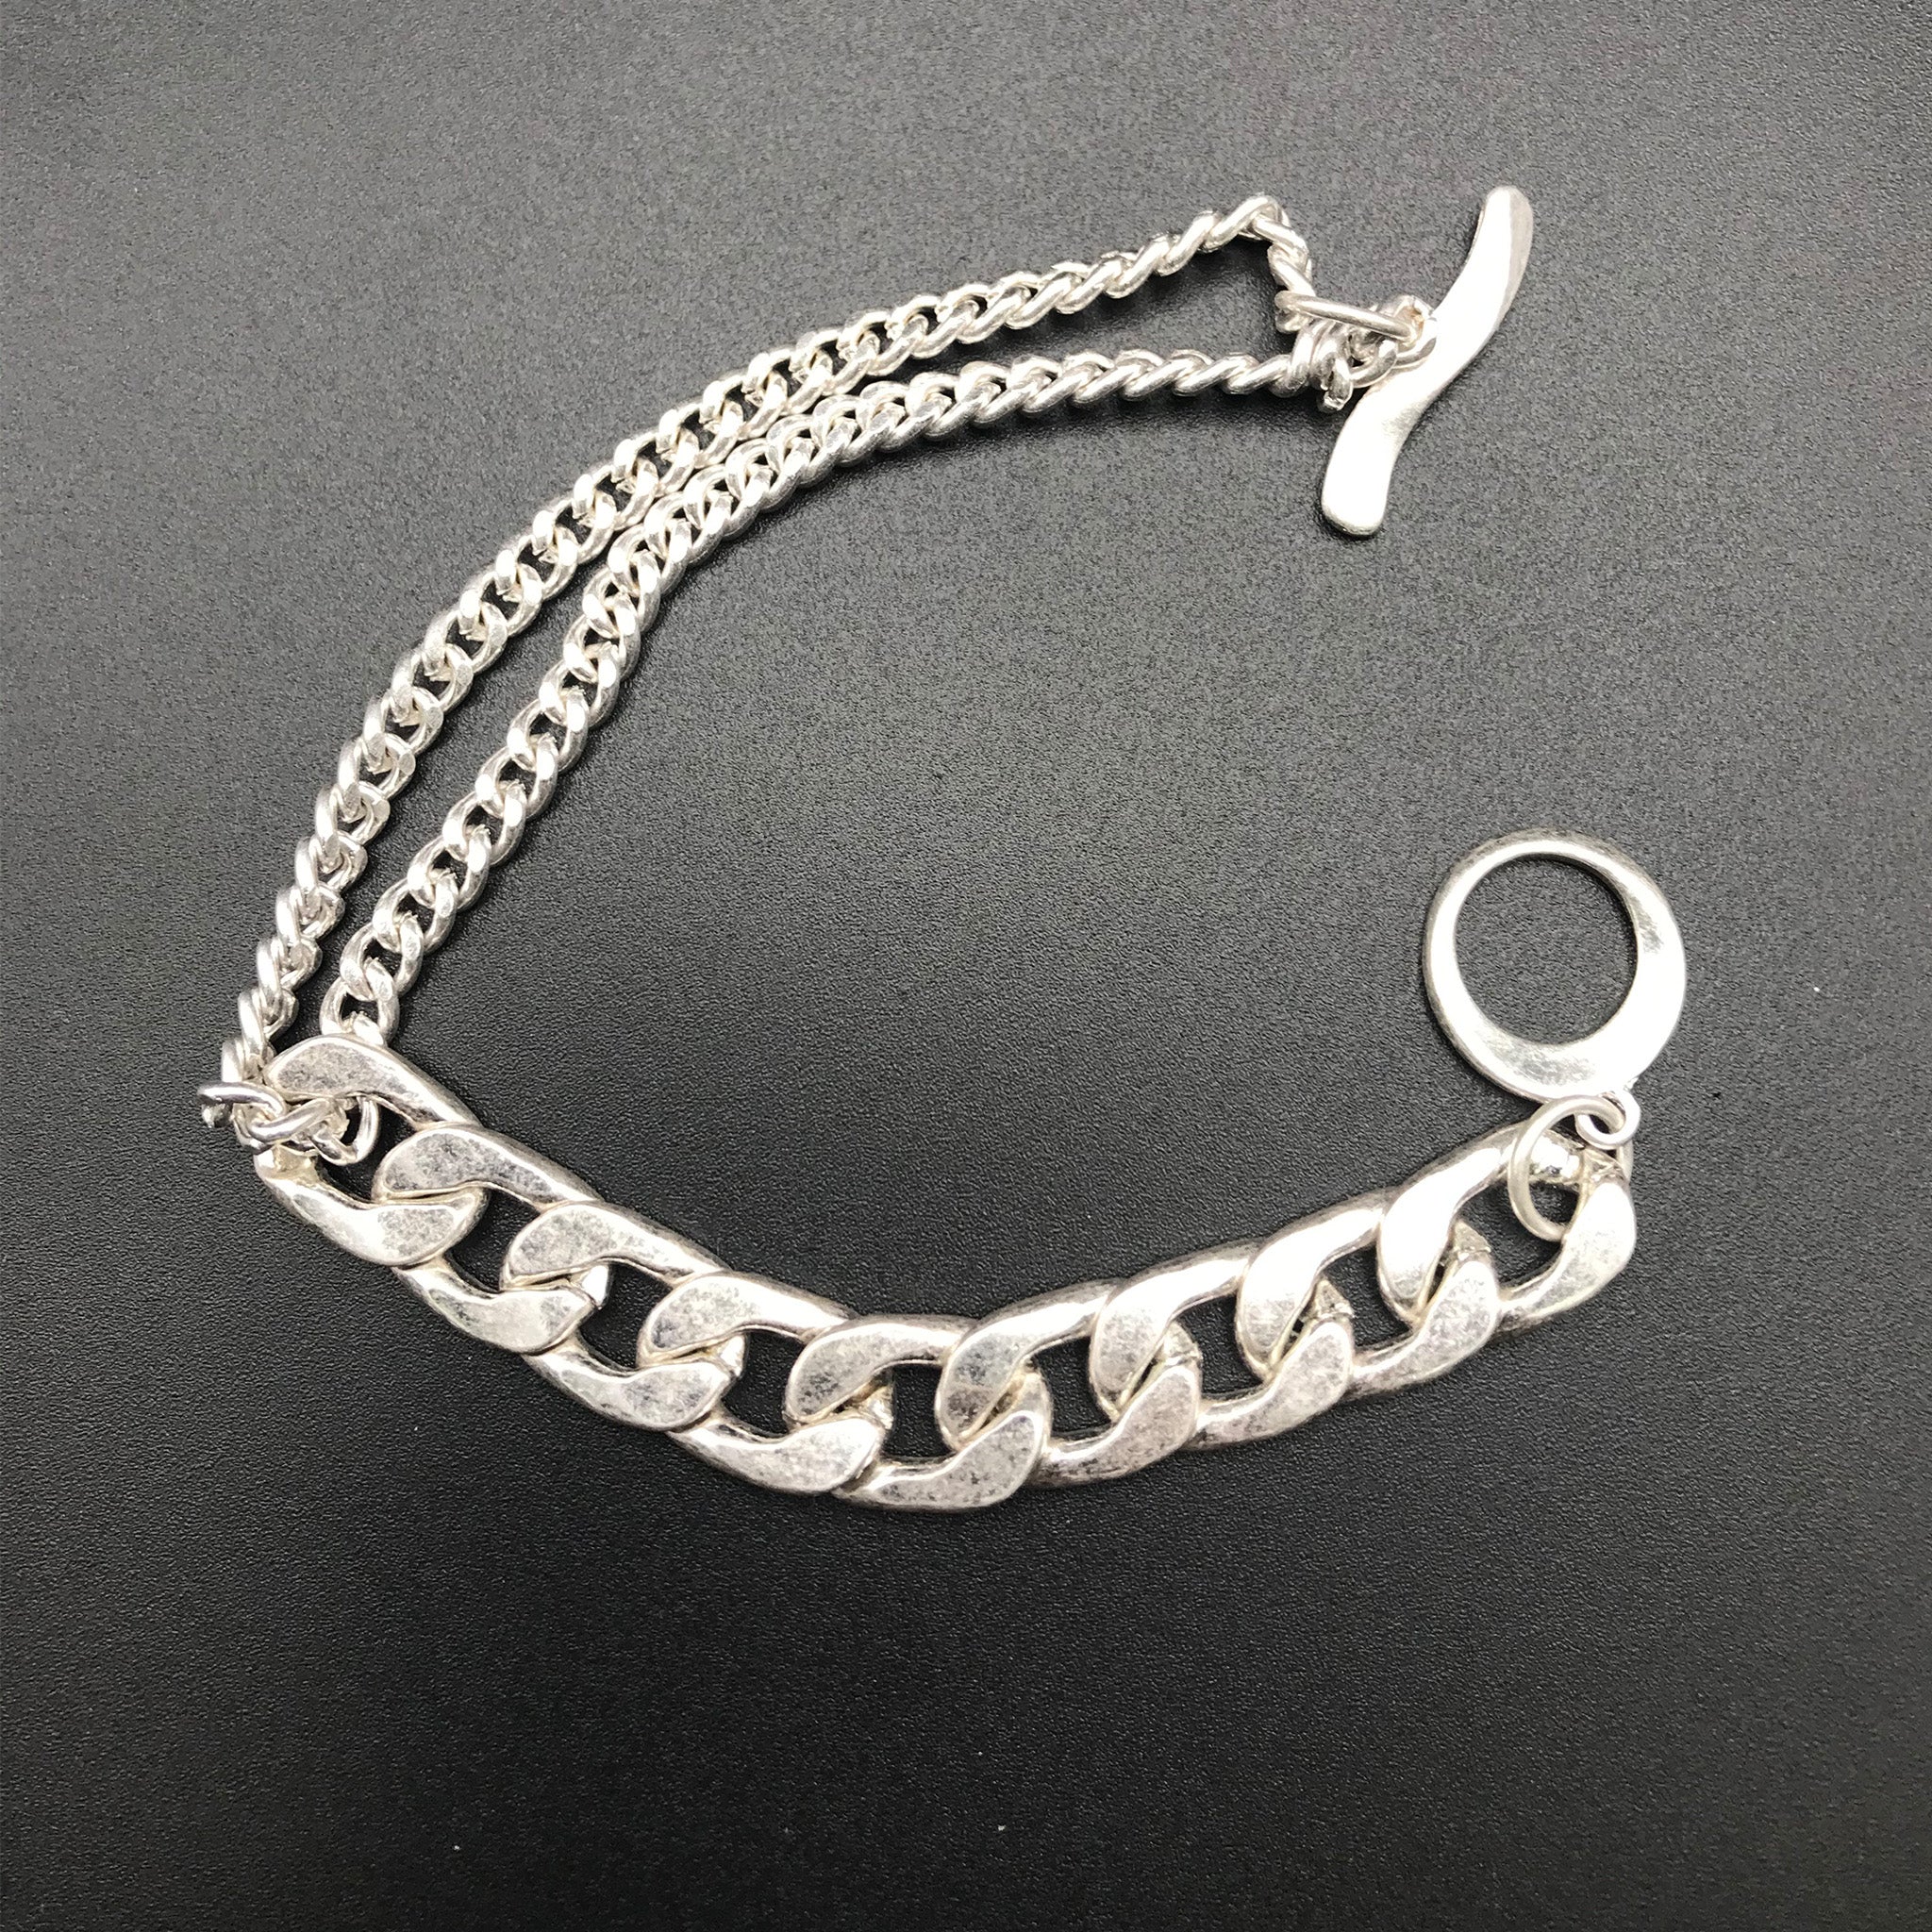 Two Type of Chains Bracelet